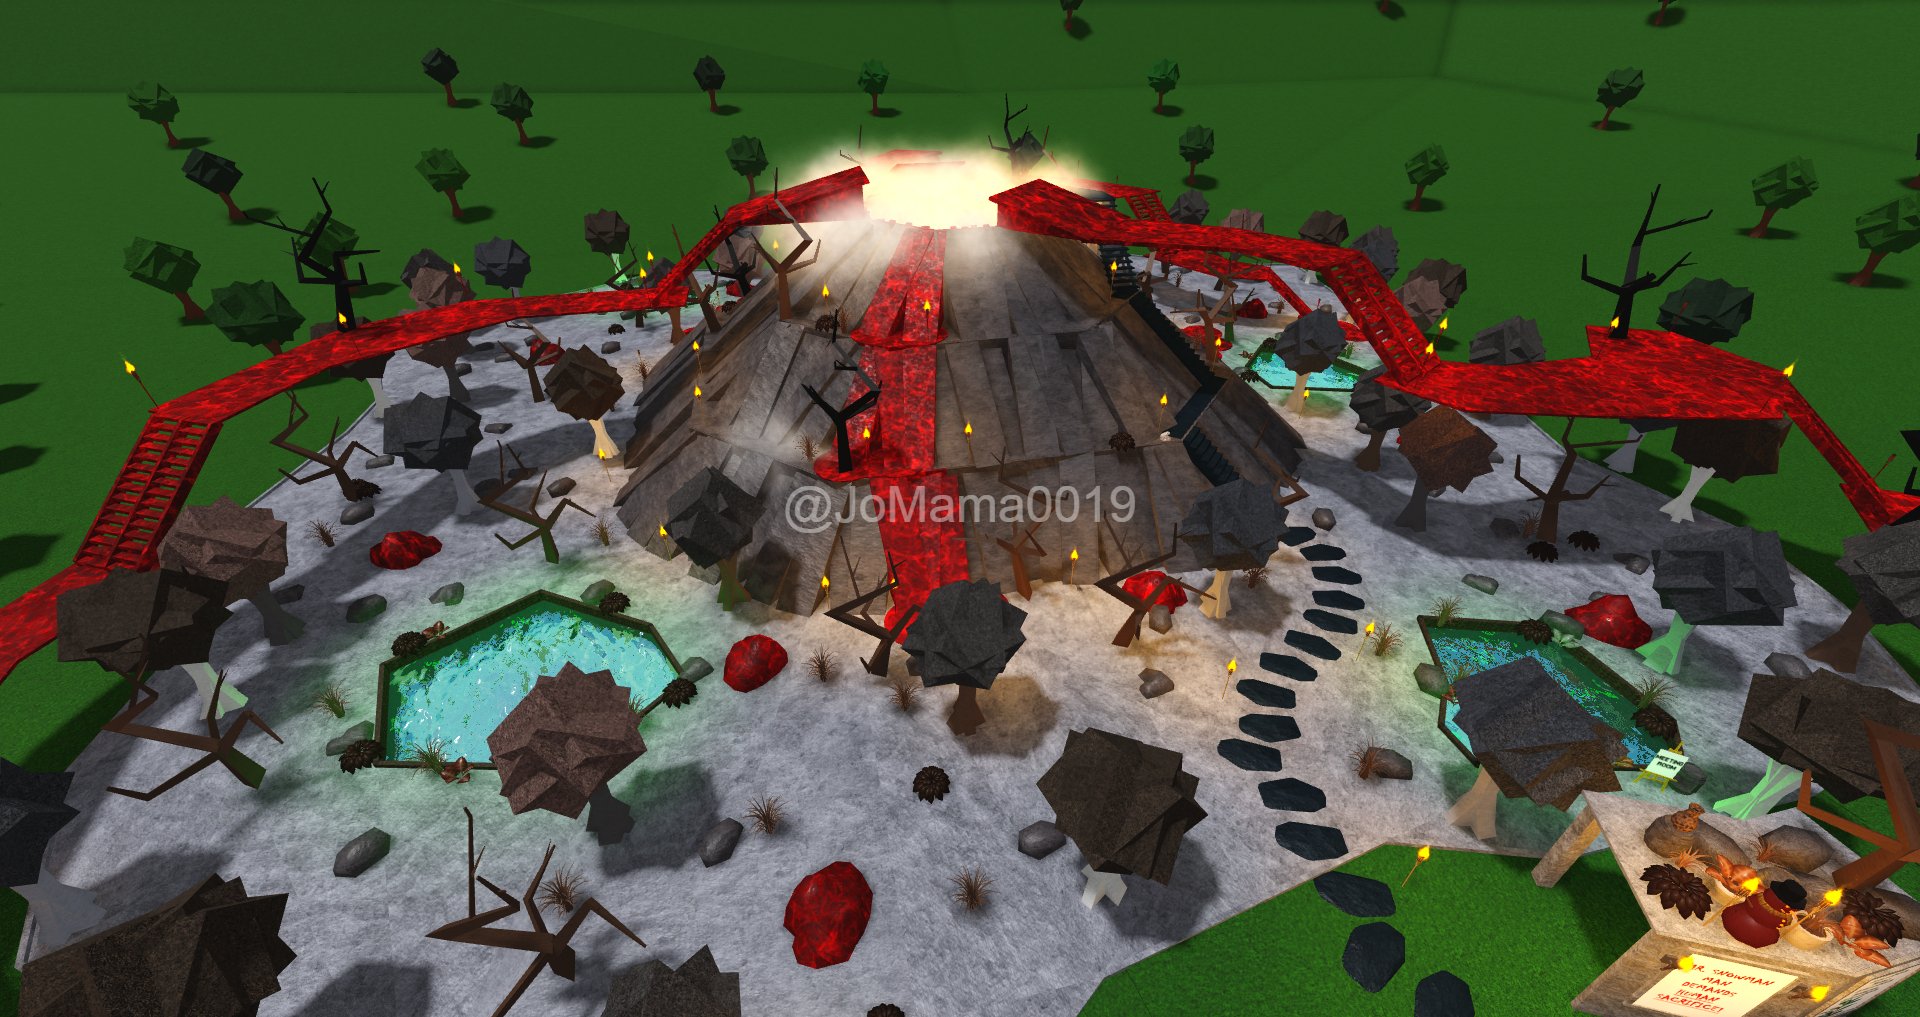 Jo On Twitter New Video Link Below Plots Tour Of My Old Outdated Unfinished Builds Volcano Purebright Scp Facility Rice Paddy Fields Balboa Park Japanese Traditional - rice fields roblox